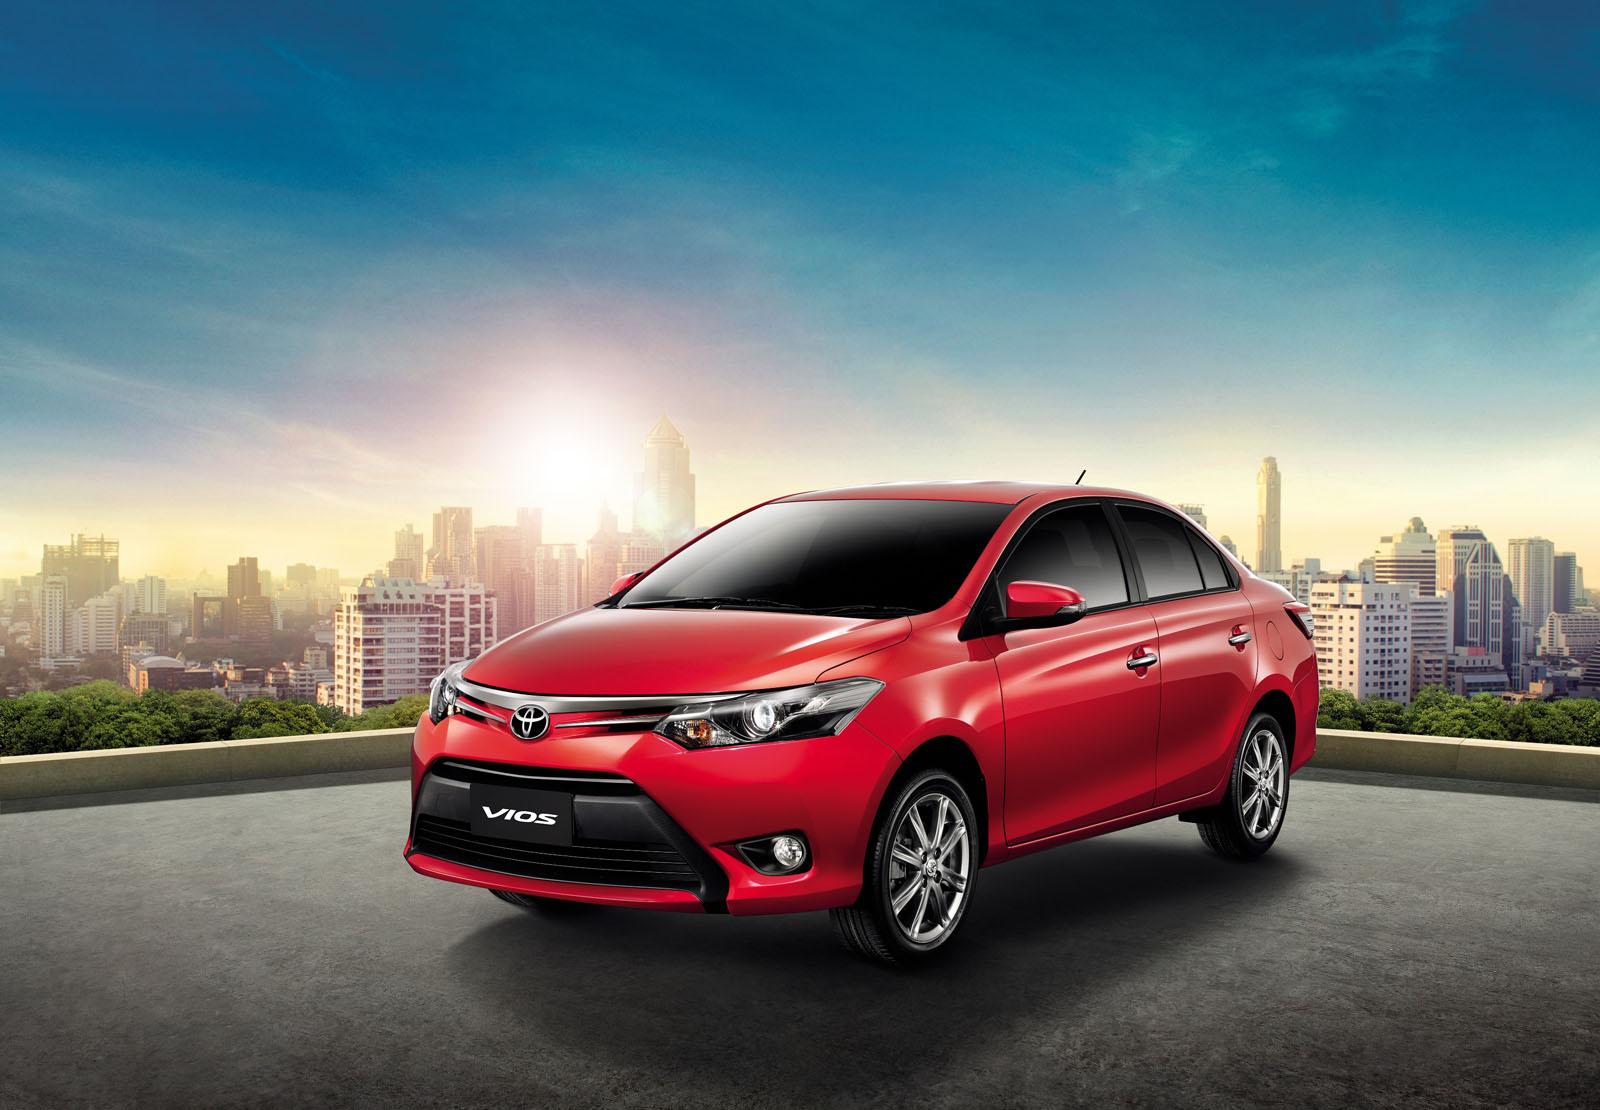 Toyota Vios 2014 photo 96233 picture at high resolution